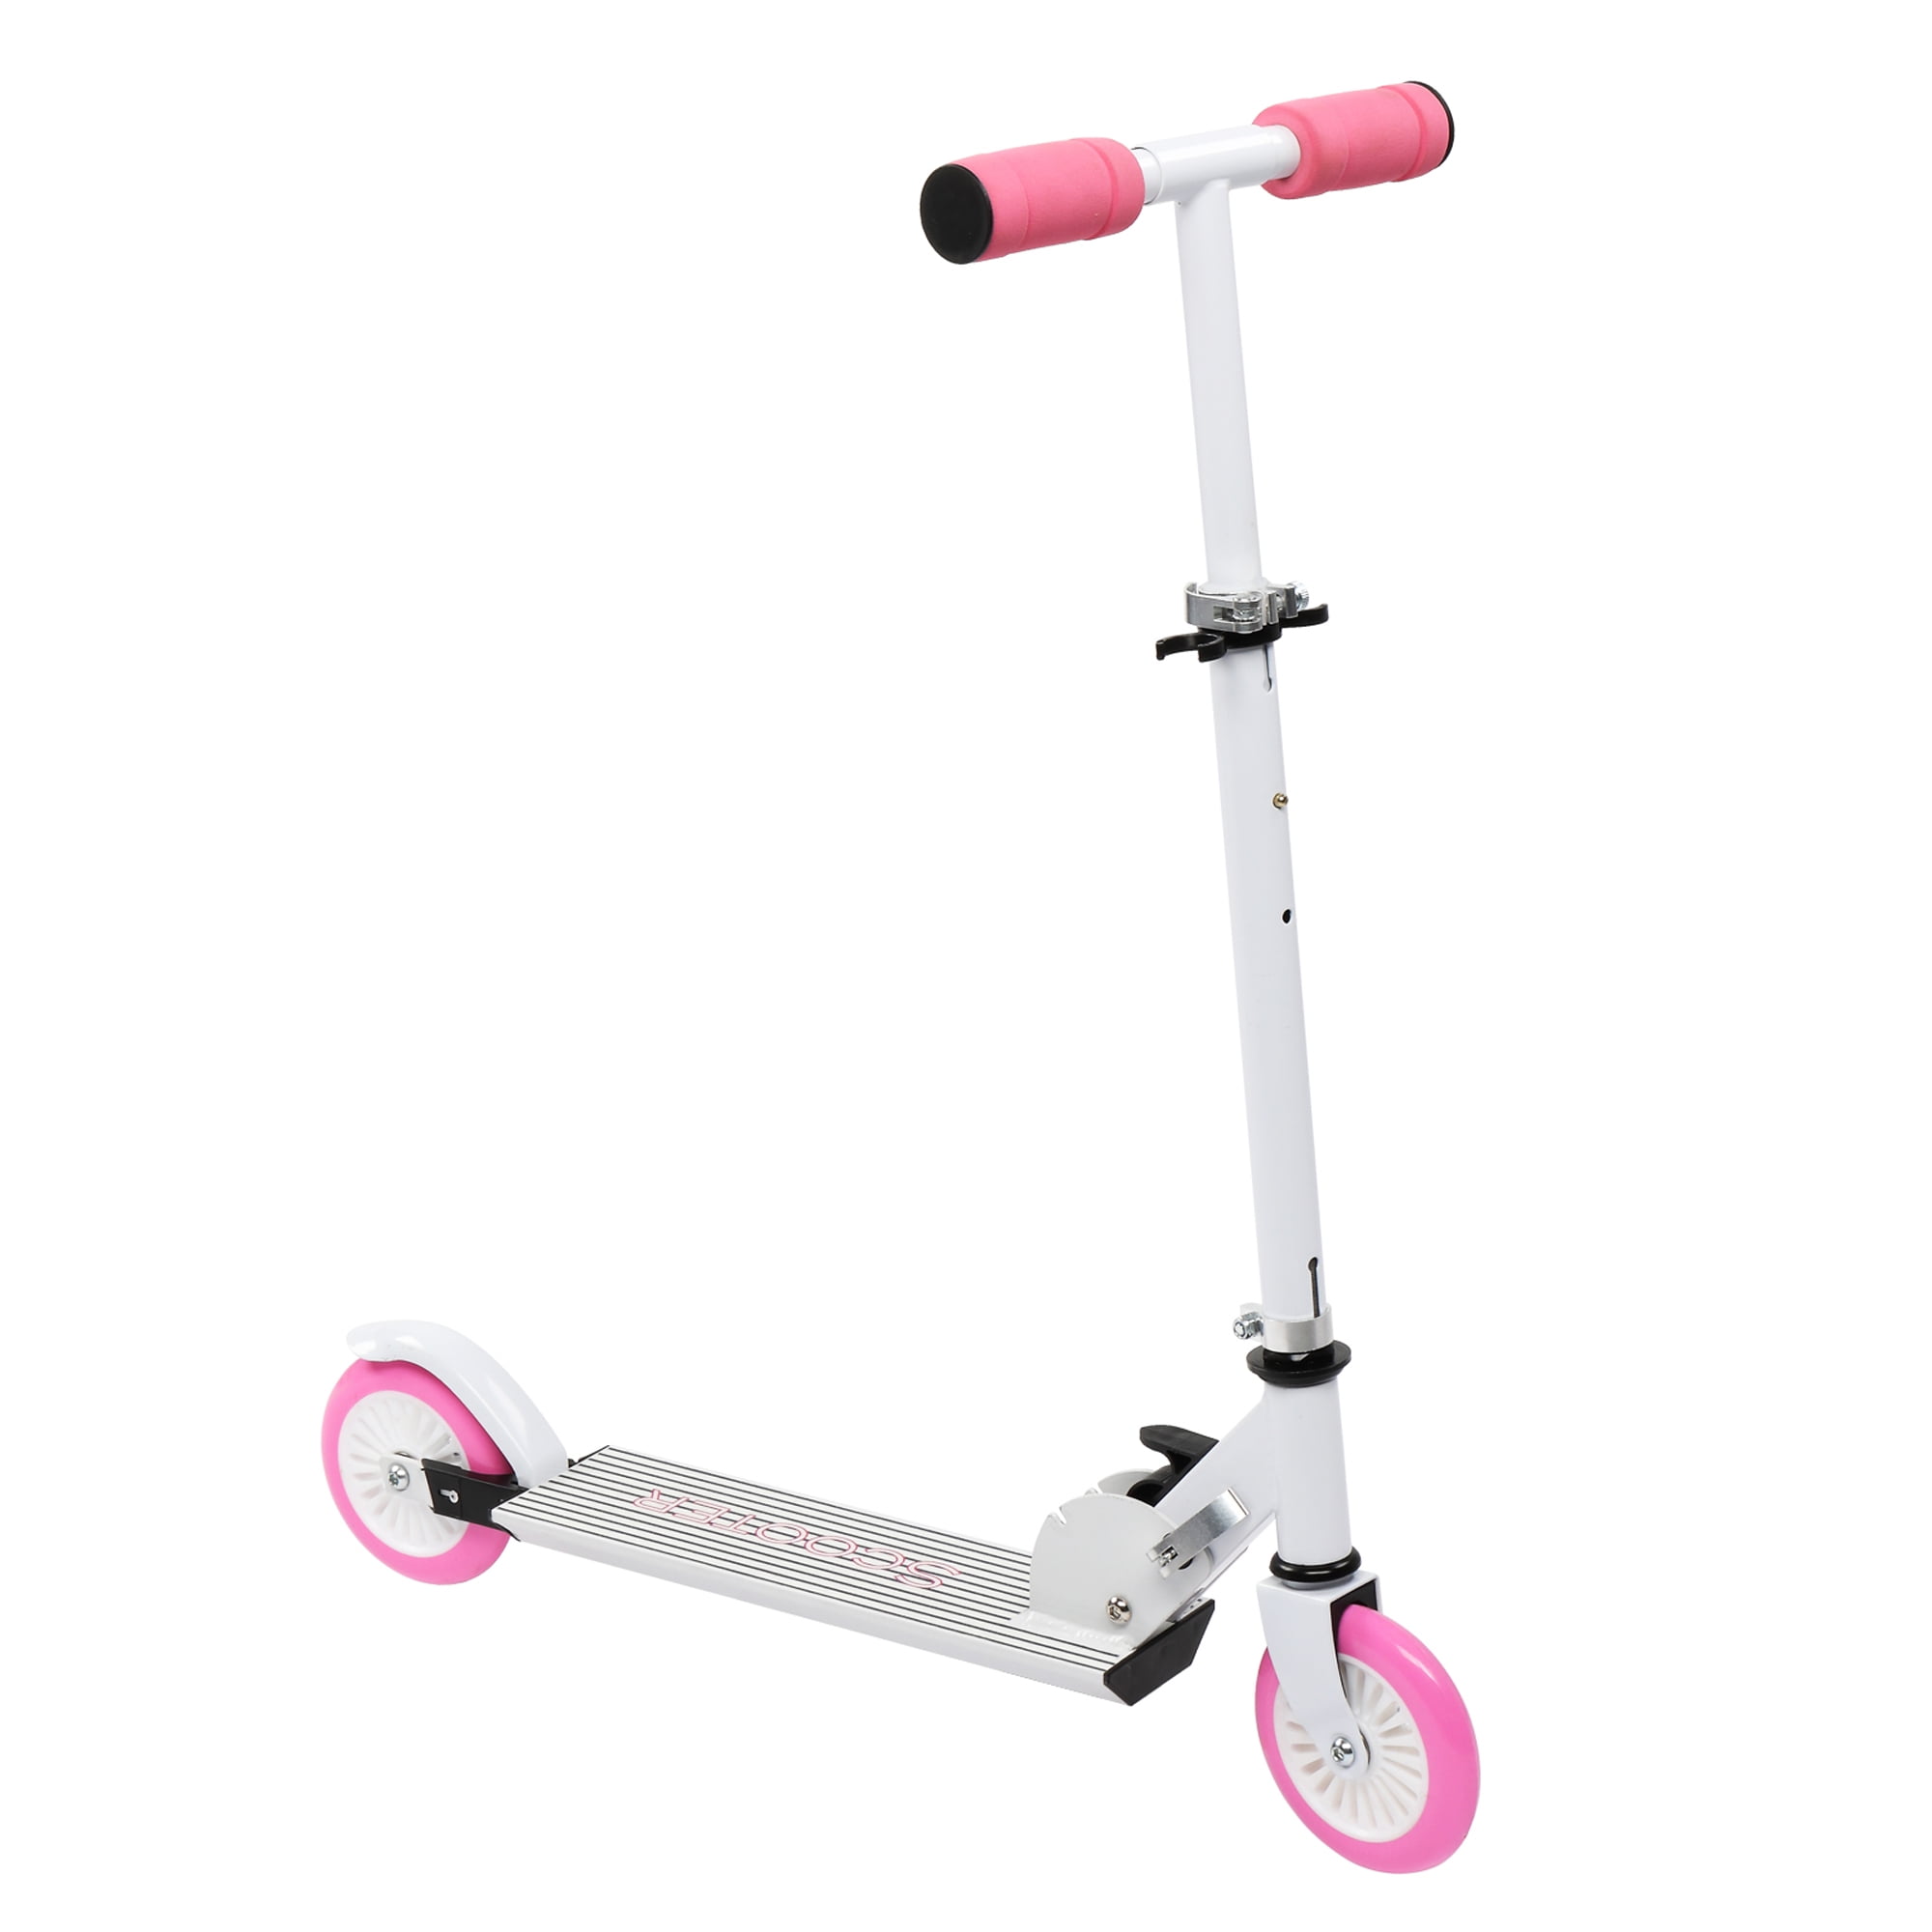 SESSLIFE Pro Trick Scooter, Pro Scooters for Teens, Aluminum Entry Level Kids Scooter, 3 Level Height Quick-Fold, Wide Board Pro Scooters, Max Capacity 110lbs, TE333 - Walmart.com